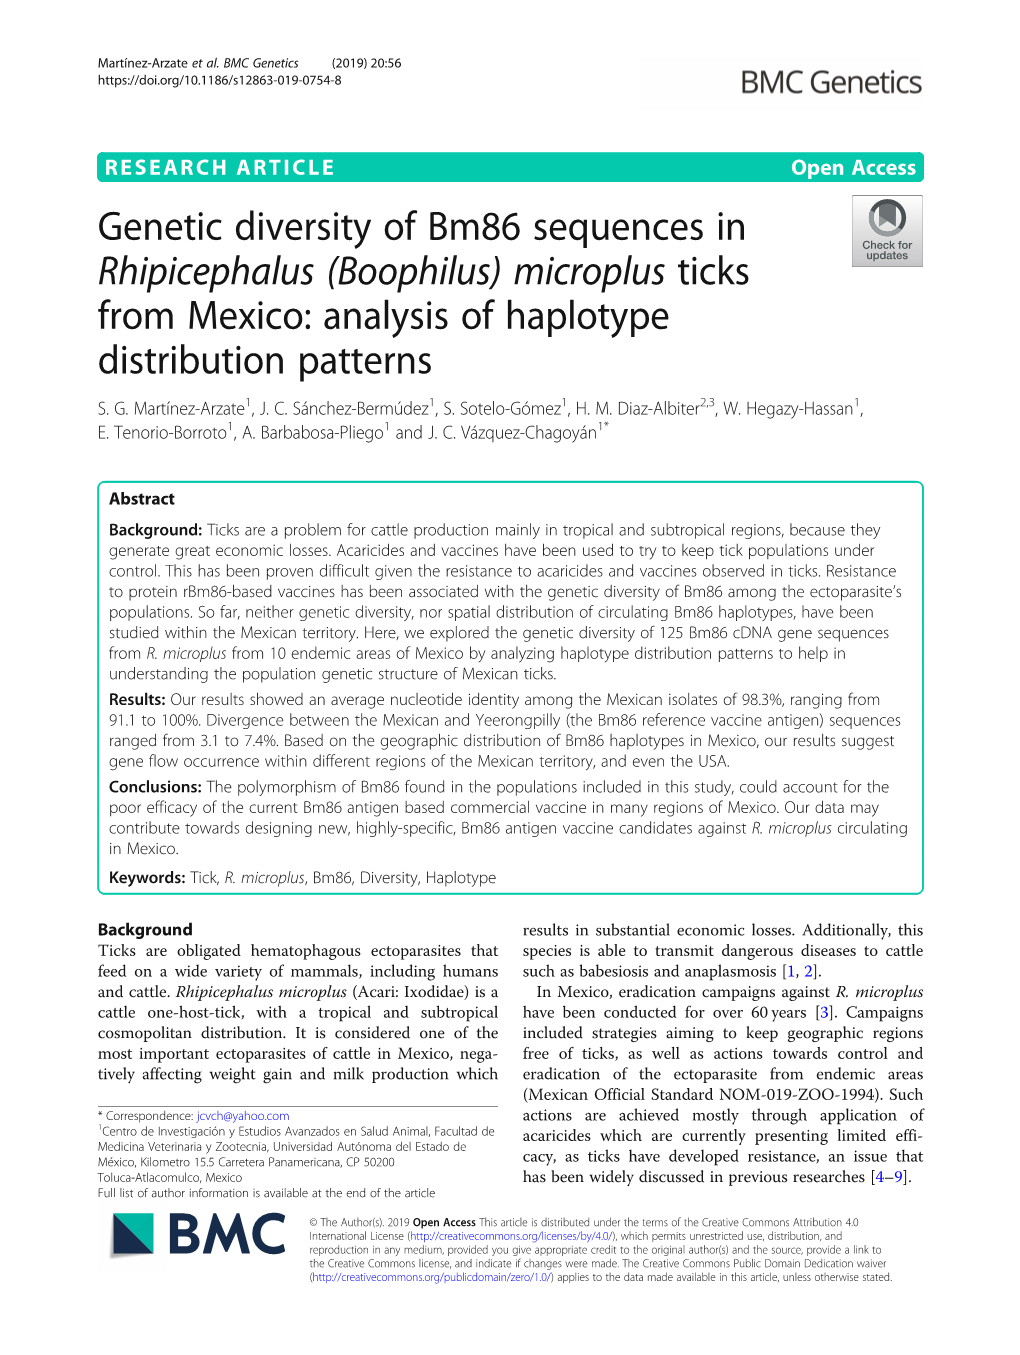 Genetic Diversity of Bm86 Sequences in Rhipicephalus (Boophilus) Microplus Ticks from Mexico: Analysis of Haplotype Distribution Patterns S